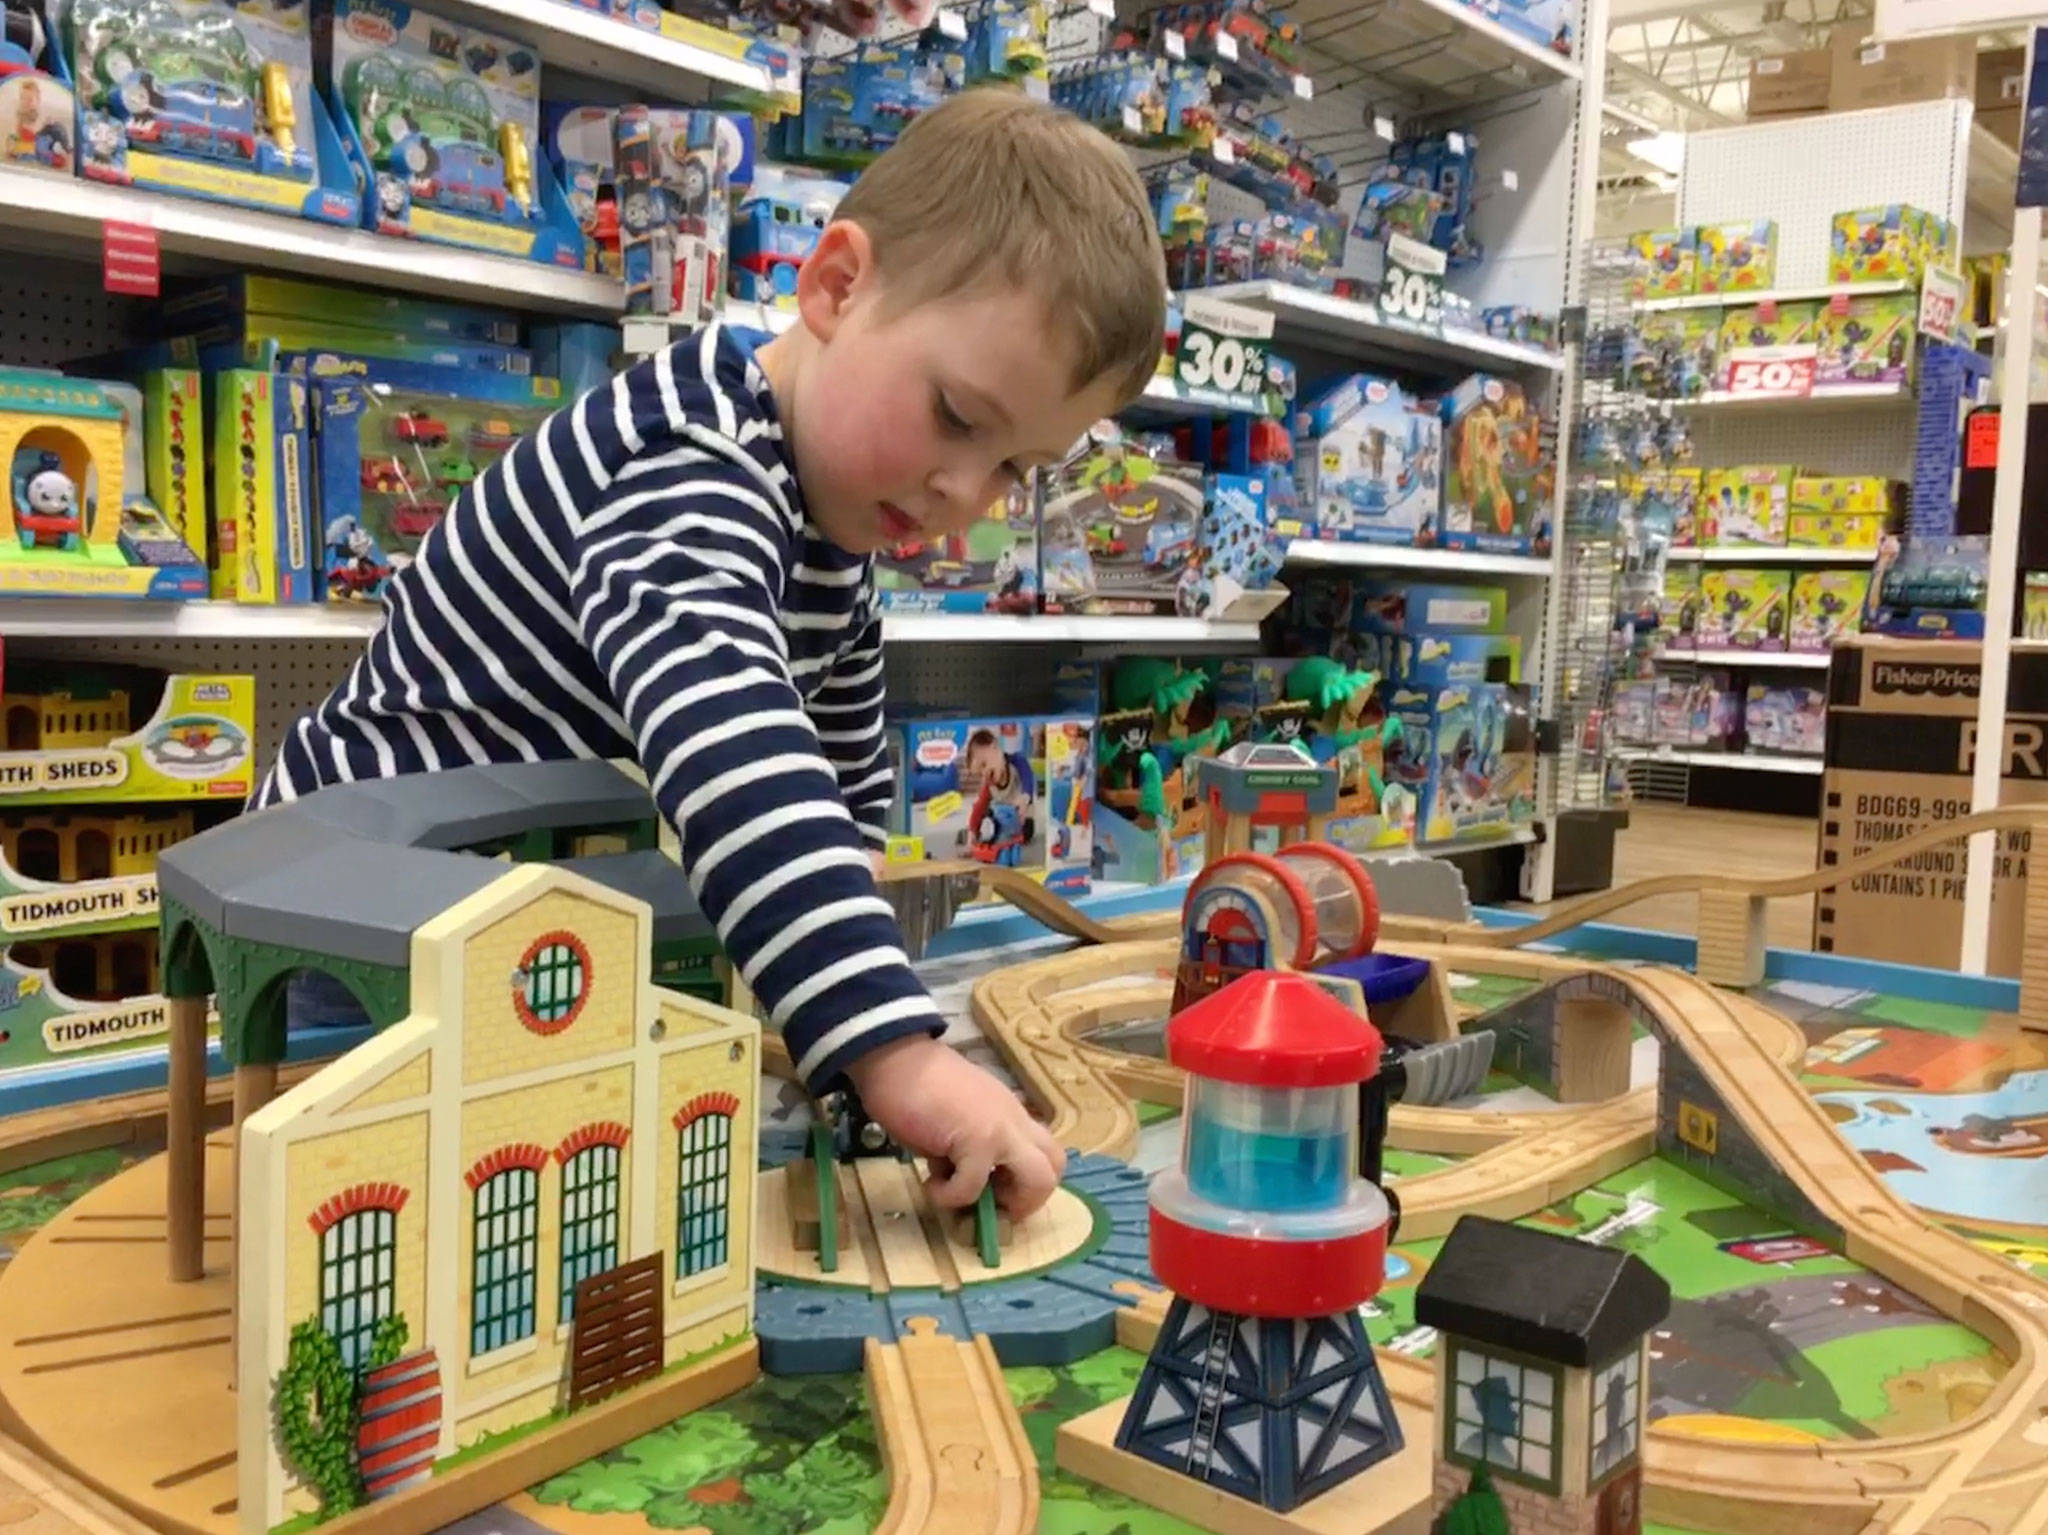 With Toys”R”Us stores set to close across the nation, the Nash family made one last trek to Sequim’s closest store stateside in Silverdale to play on the train table, look around and have fun. Sequim Gazette photos by Matthew Nash